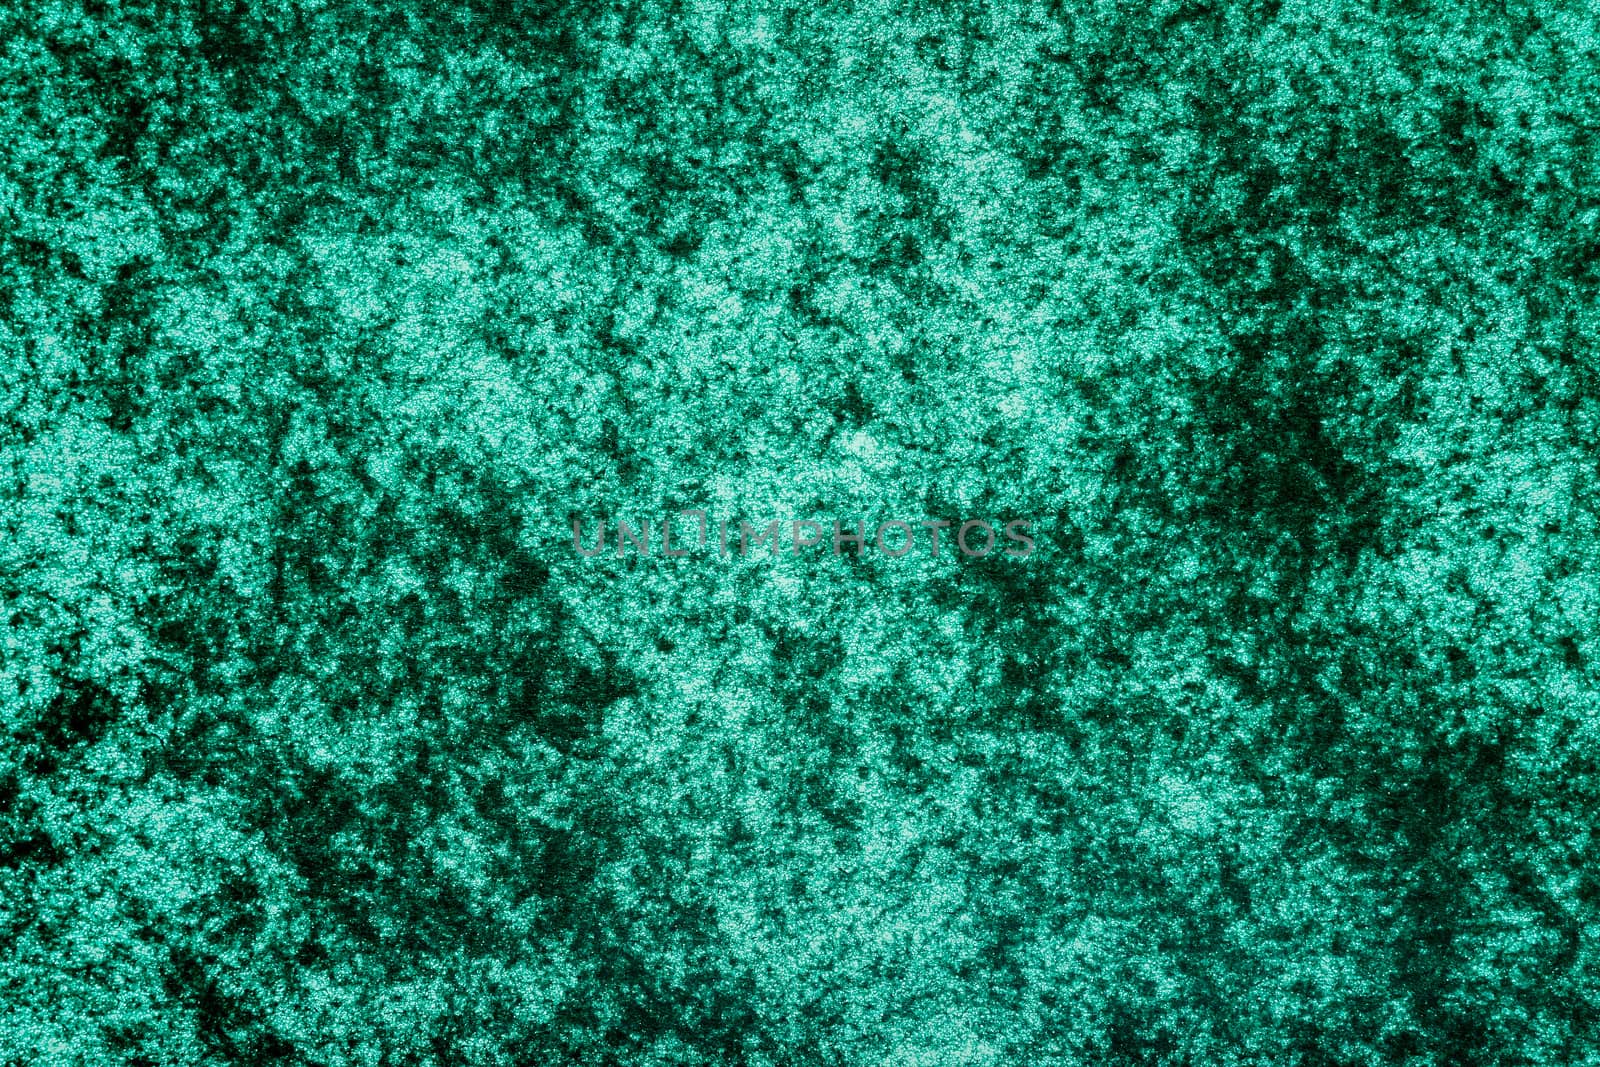 Green material. Abstract background. Texture close up